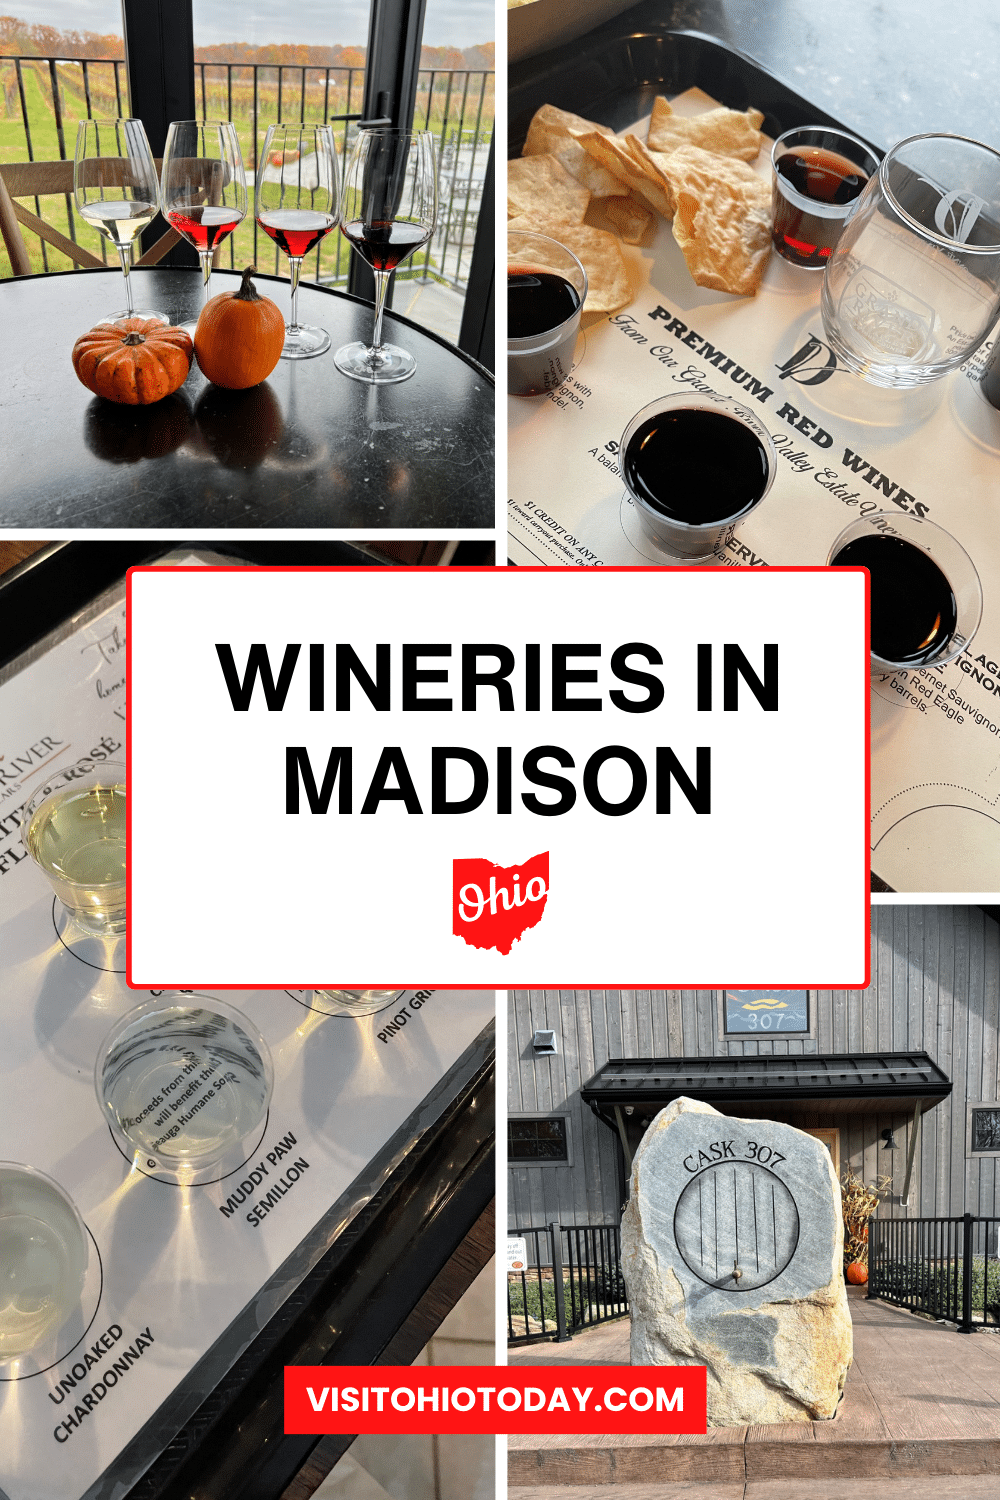 Madison is located in the heart of Ohio’s wine country, in the Grand River Valley. There is a good selection of wineries in Madison Ohio that welcome visitors, offering fun, food, and great wine.